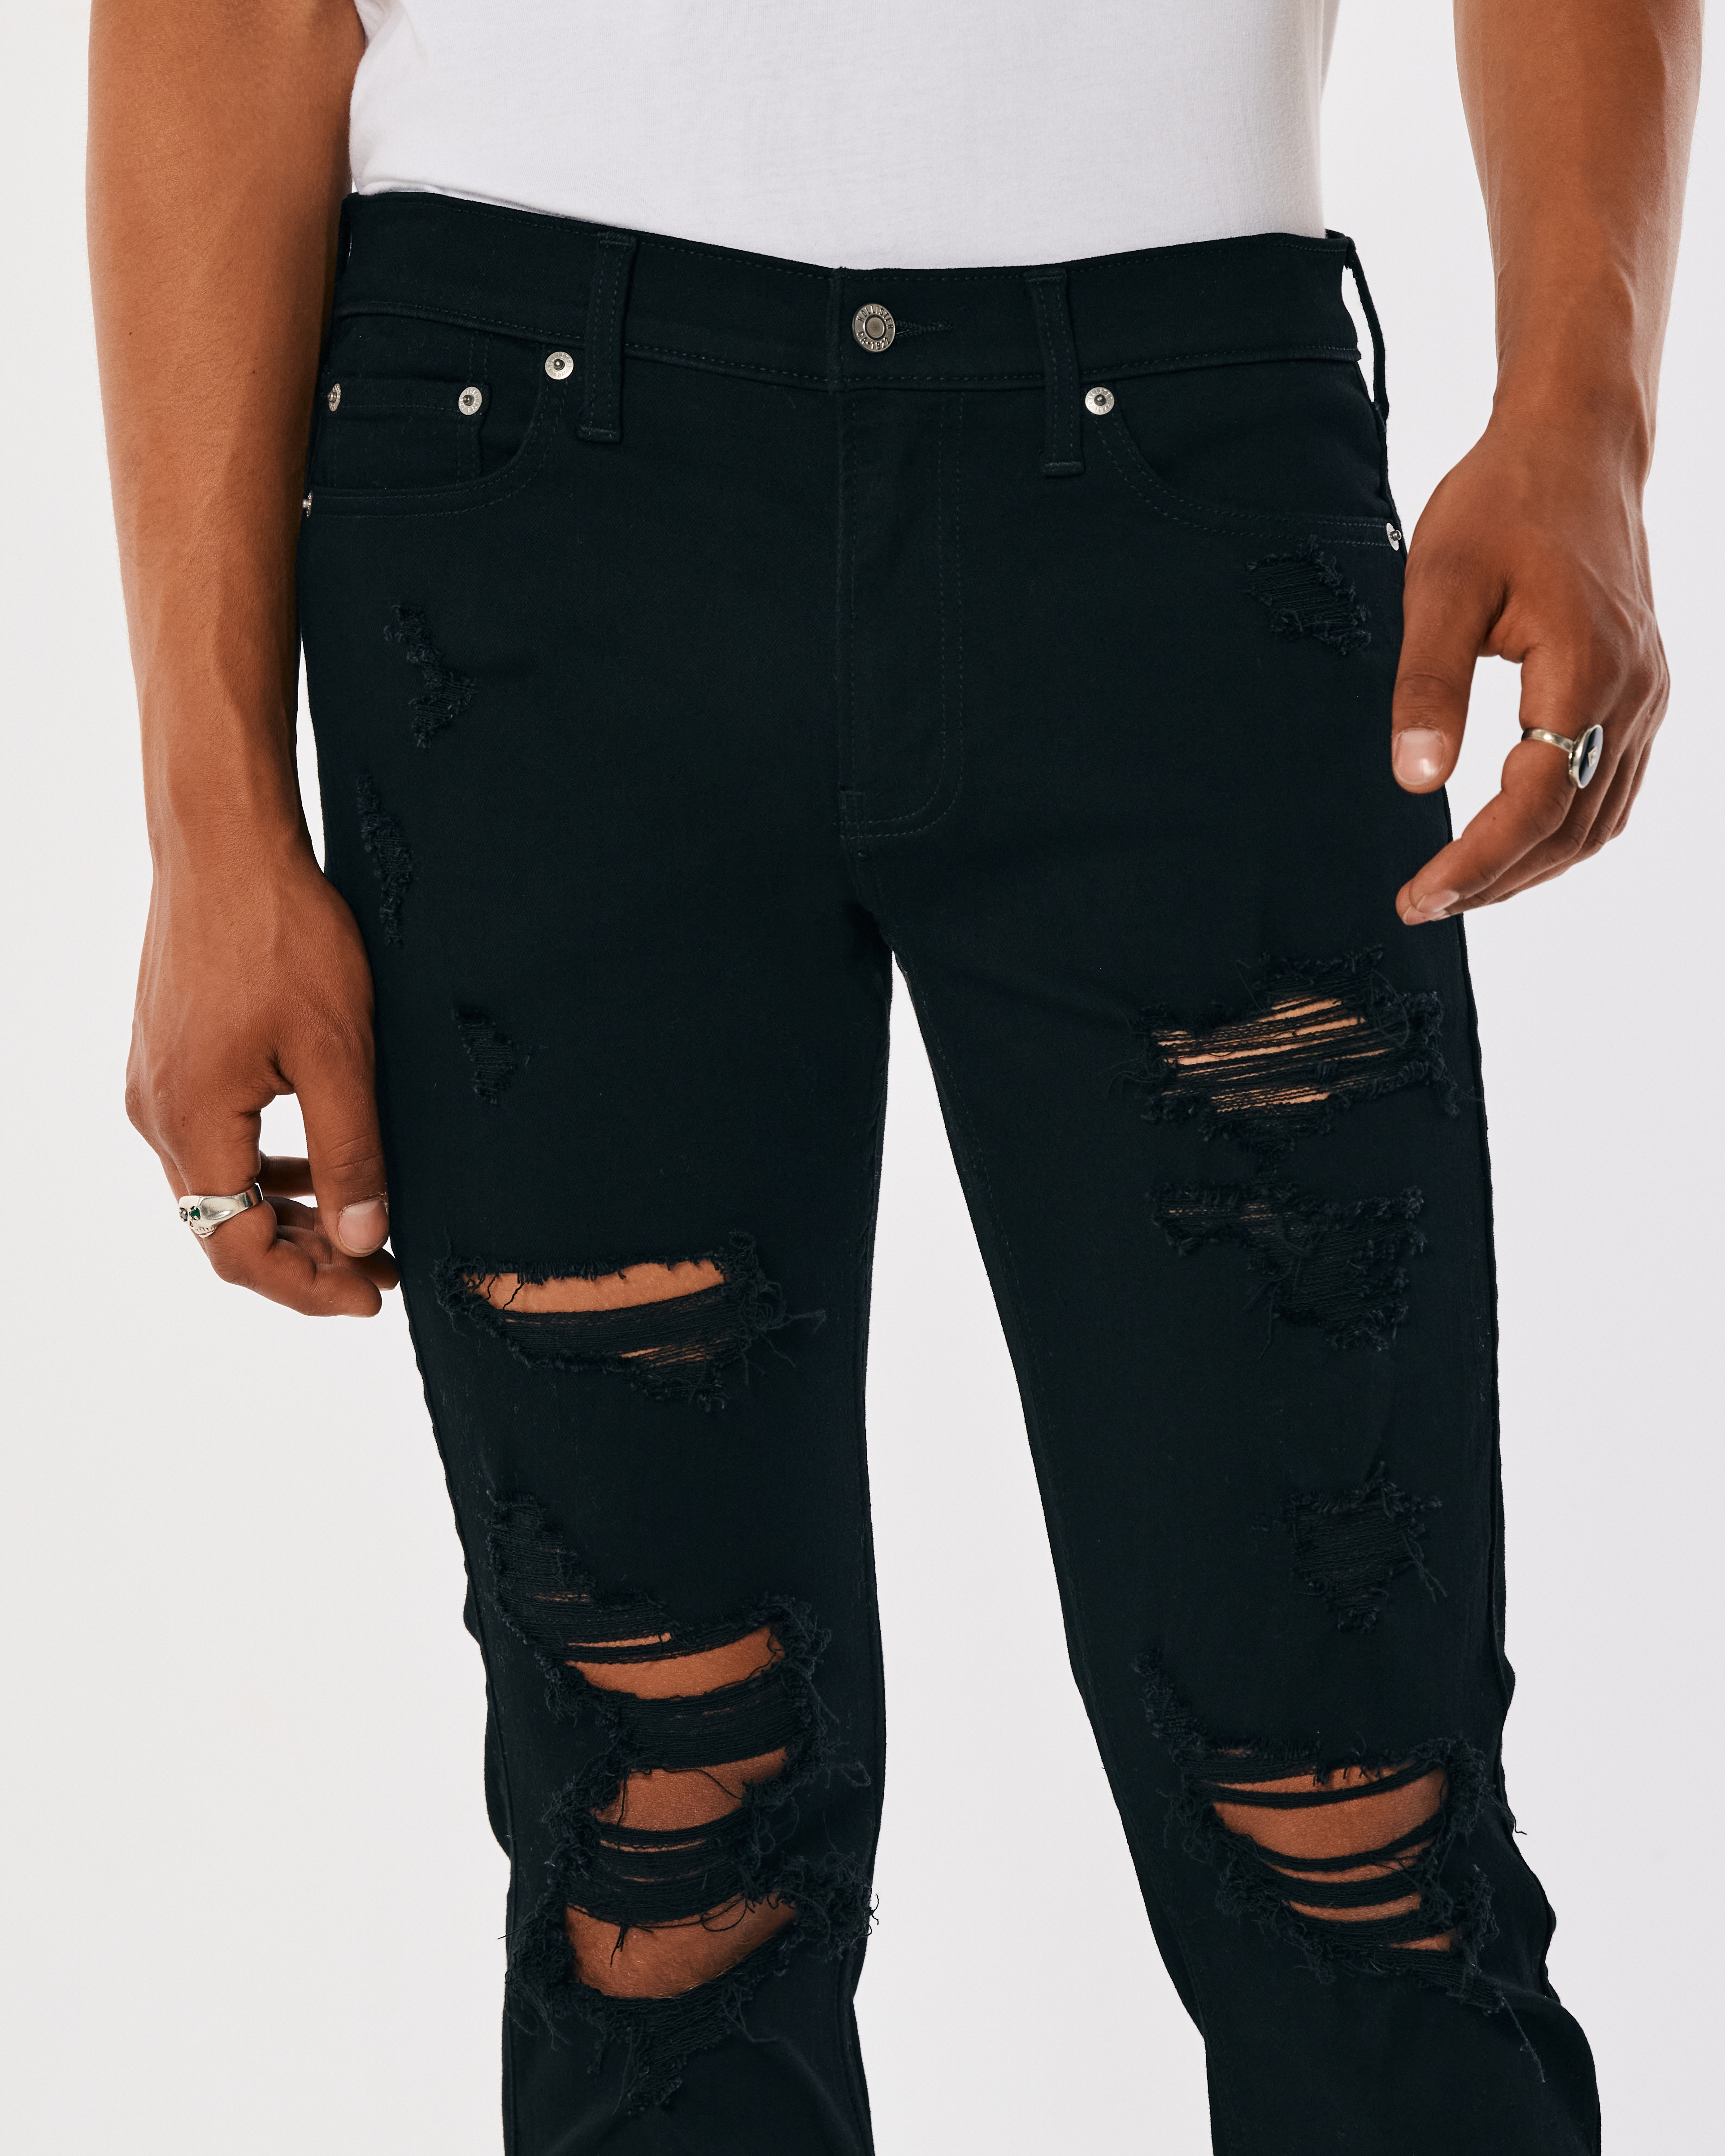 Black No Fade Stacked Skinny Jeans